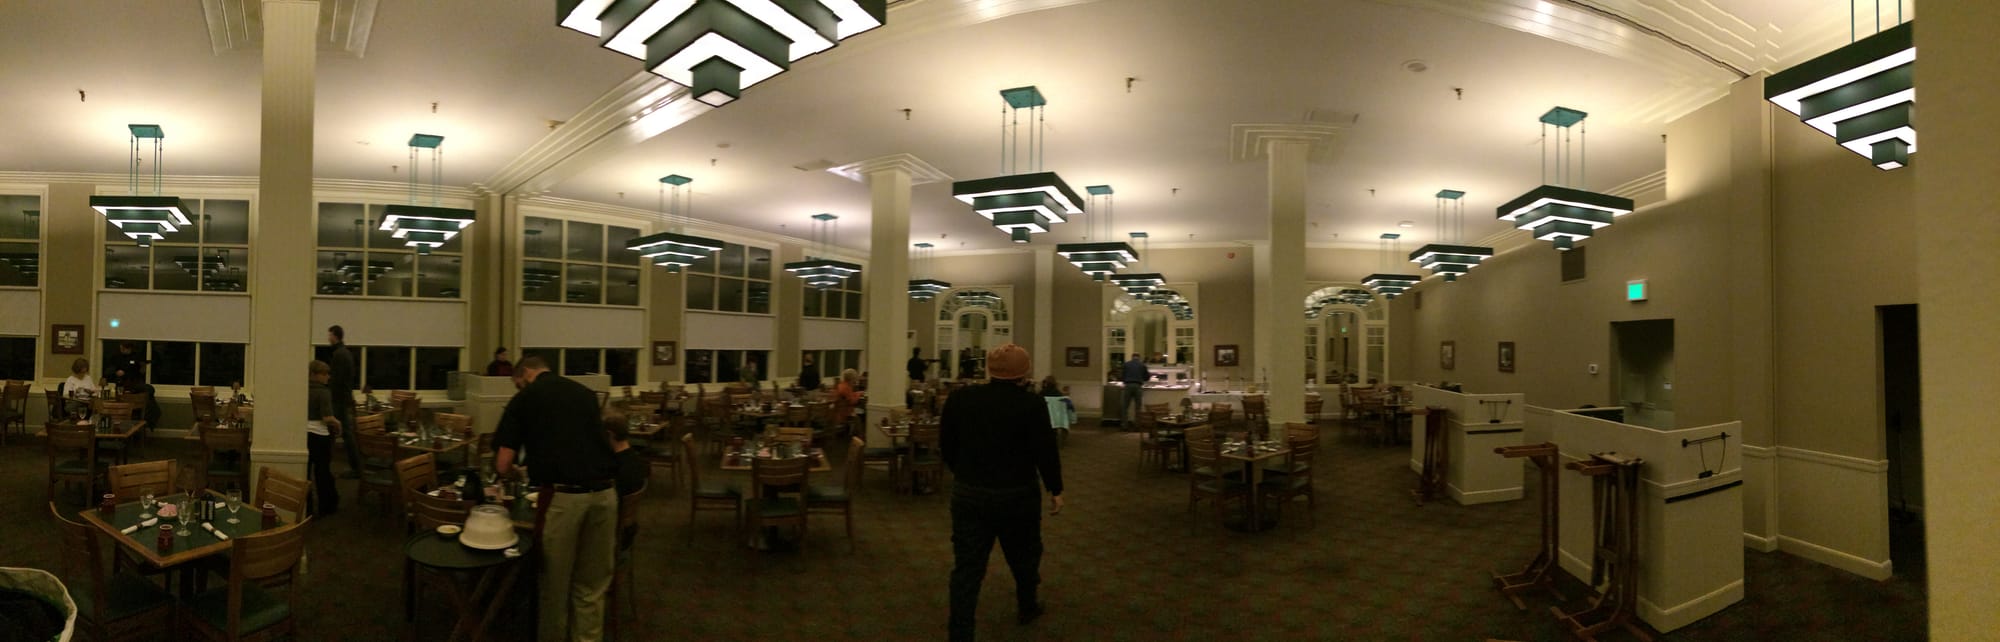 Photo by Author — the Dining Hall at Mammoth Hot Springs Hotel